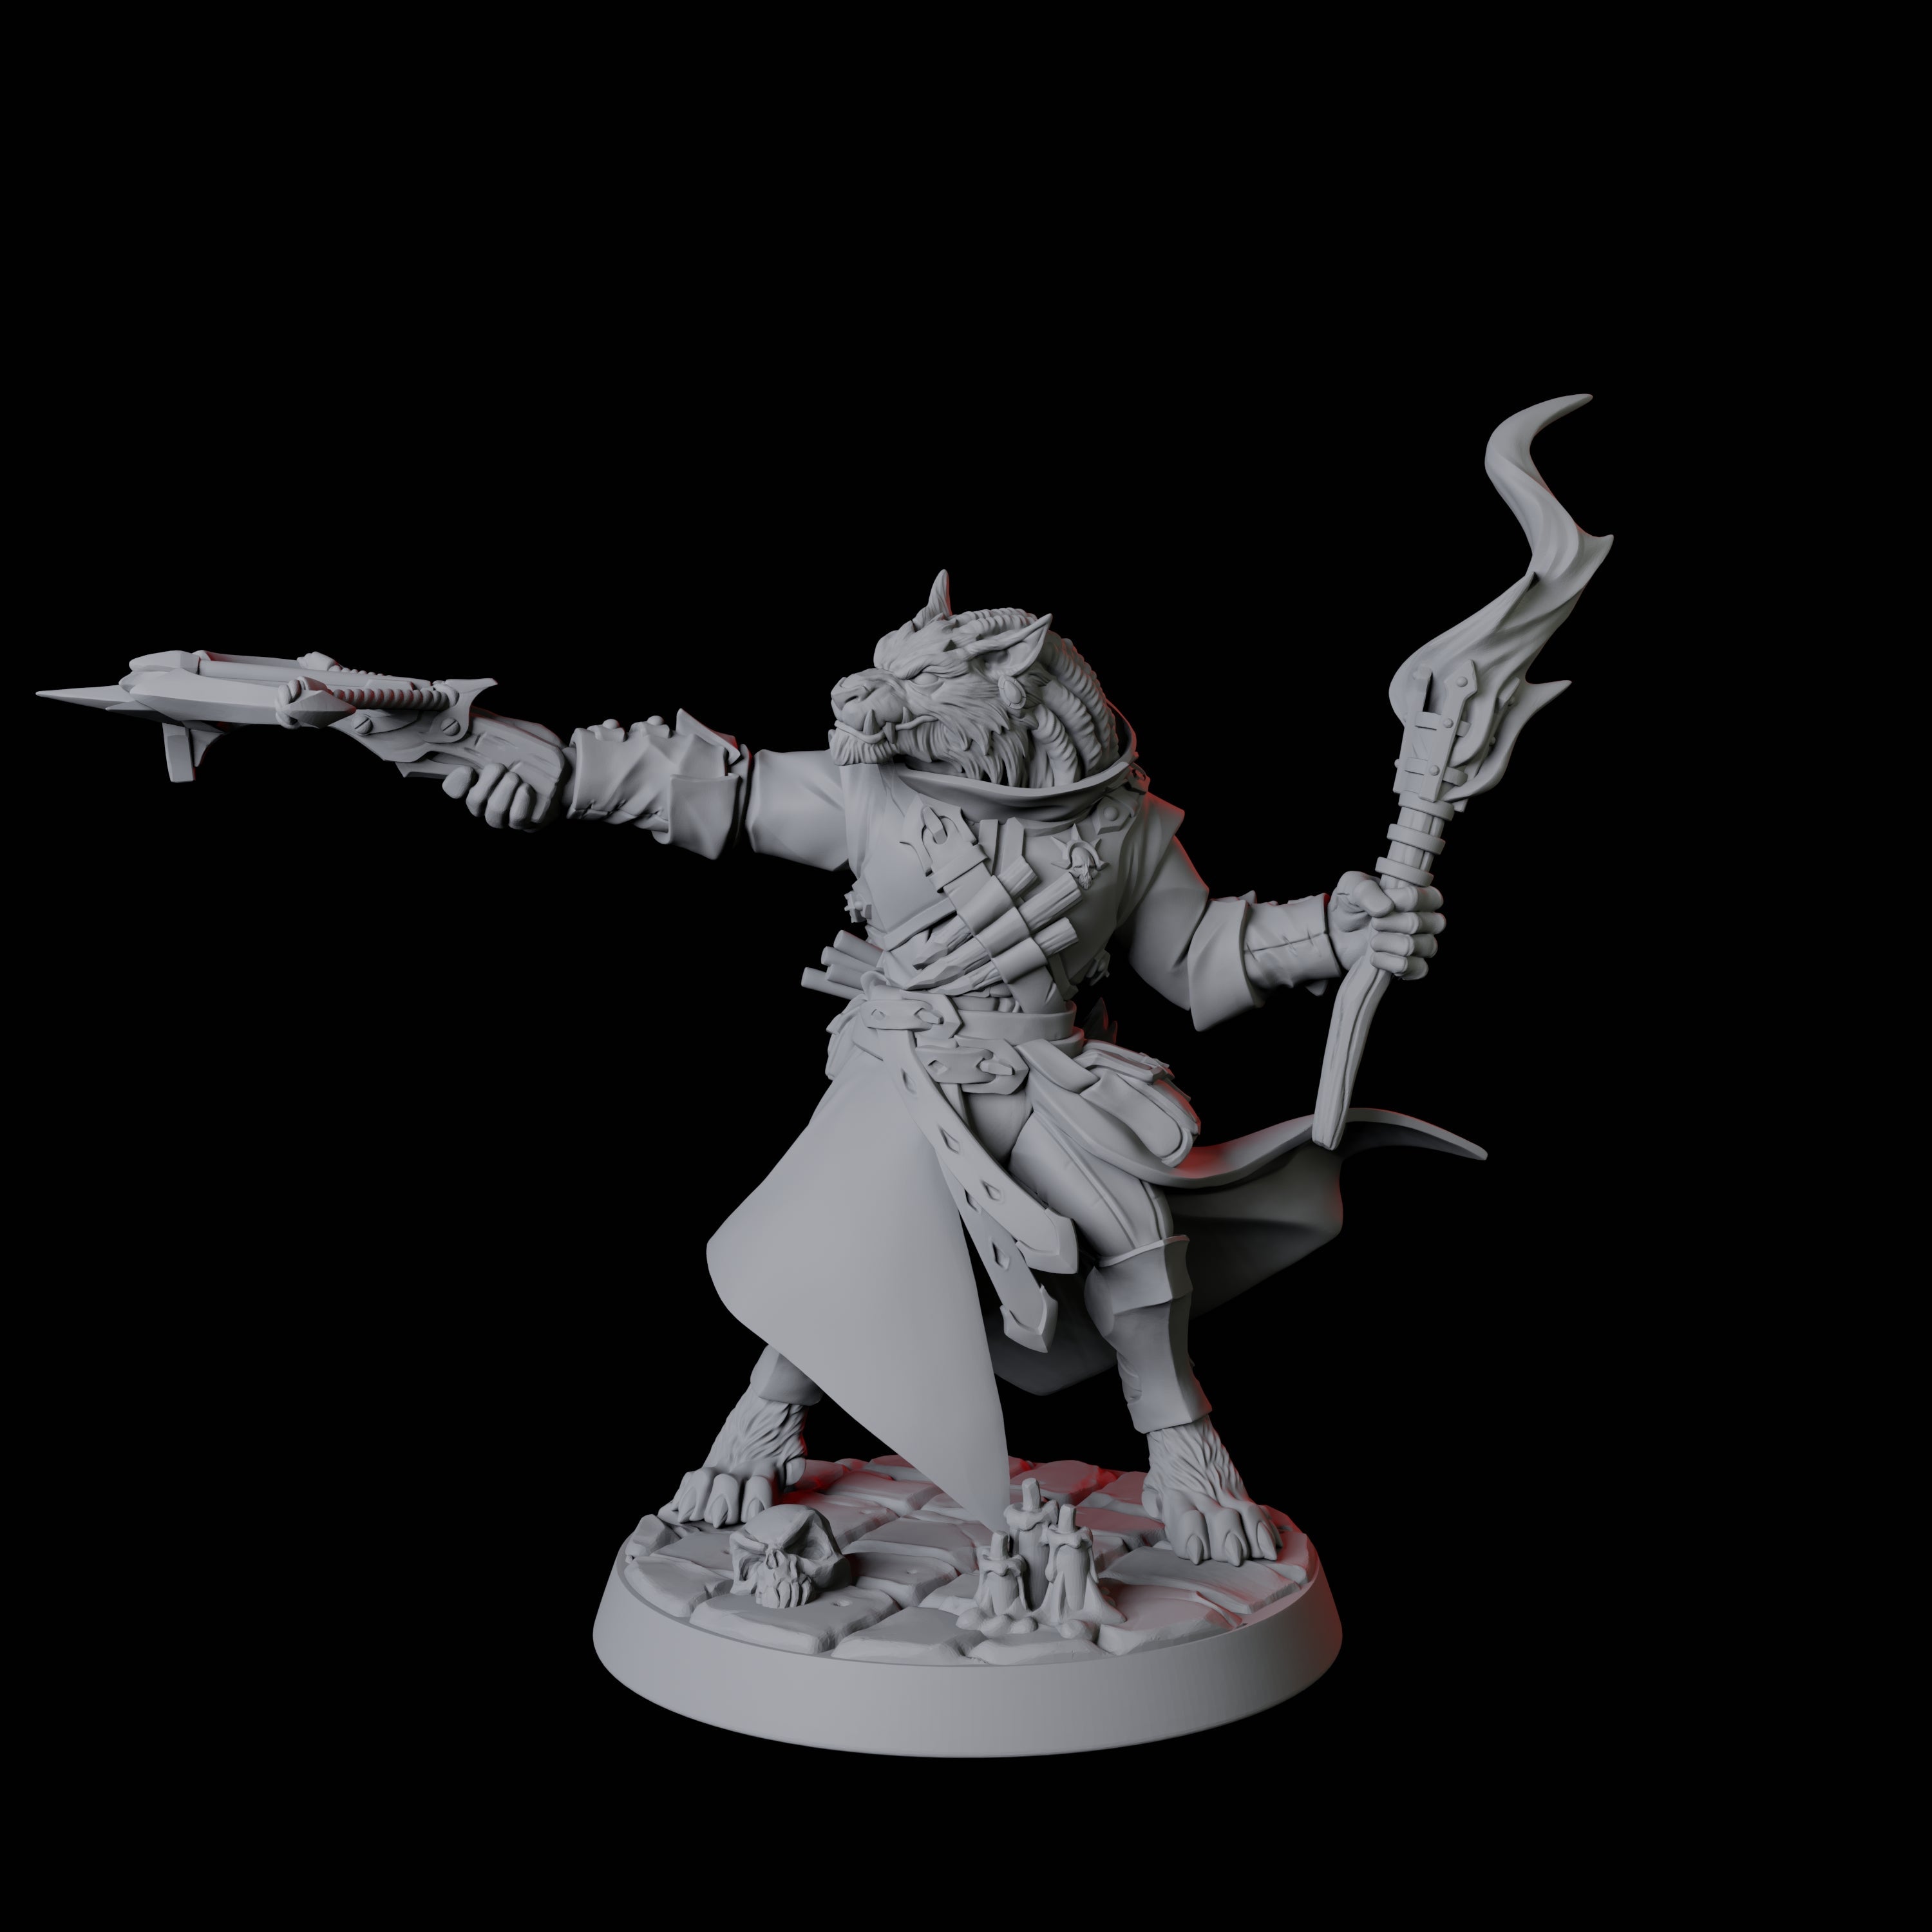 Werewolf Vampire Hunter C Miniature for Dungeons and Dragons, Pathfinder or other TTRPGs